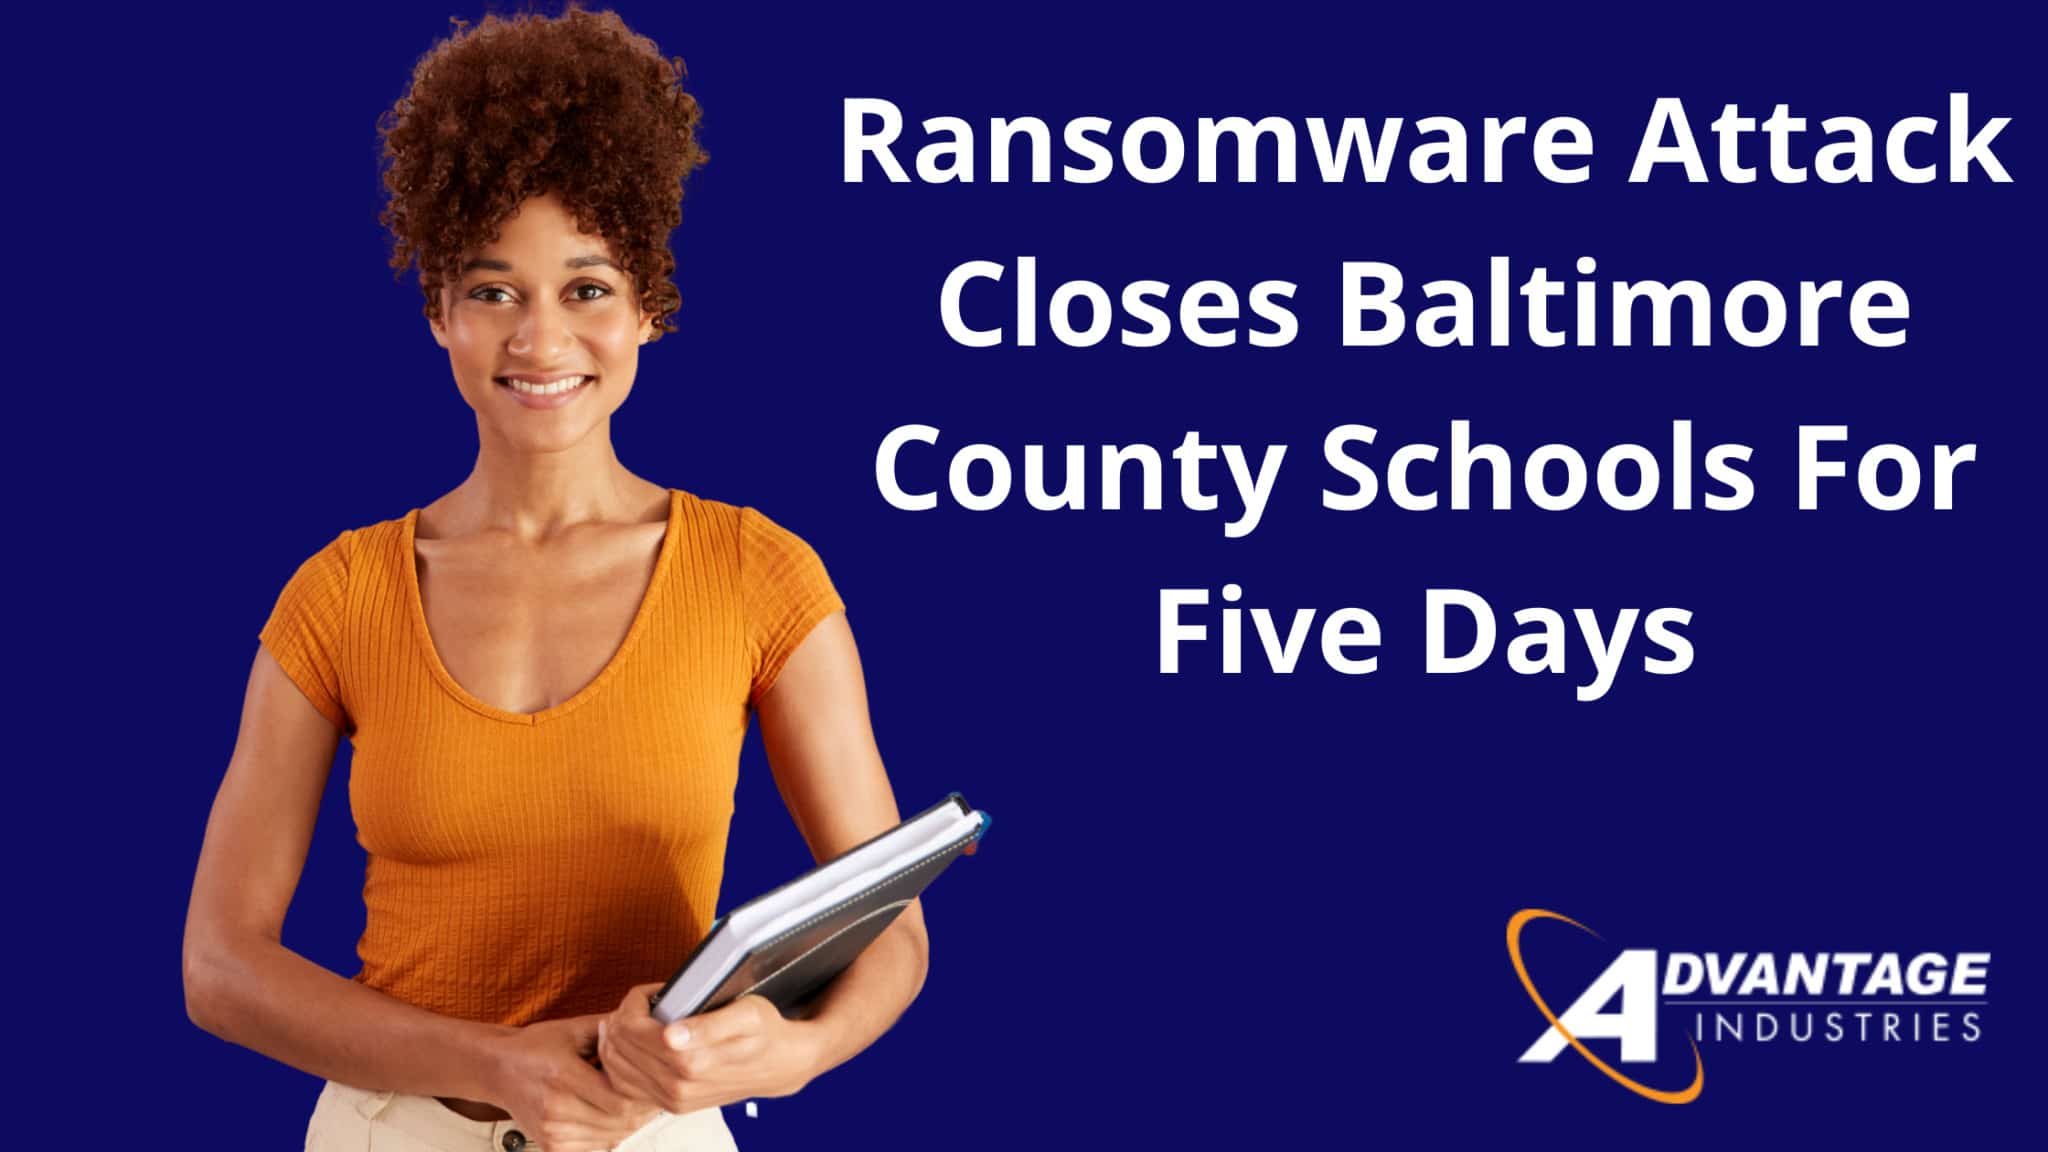 Ransomware Attack Closes Baltimore County Schools For Five Days